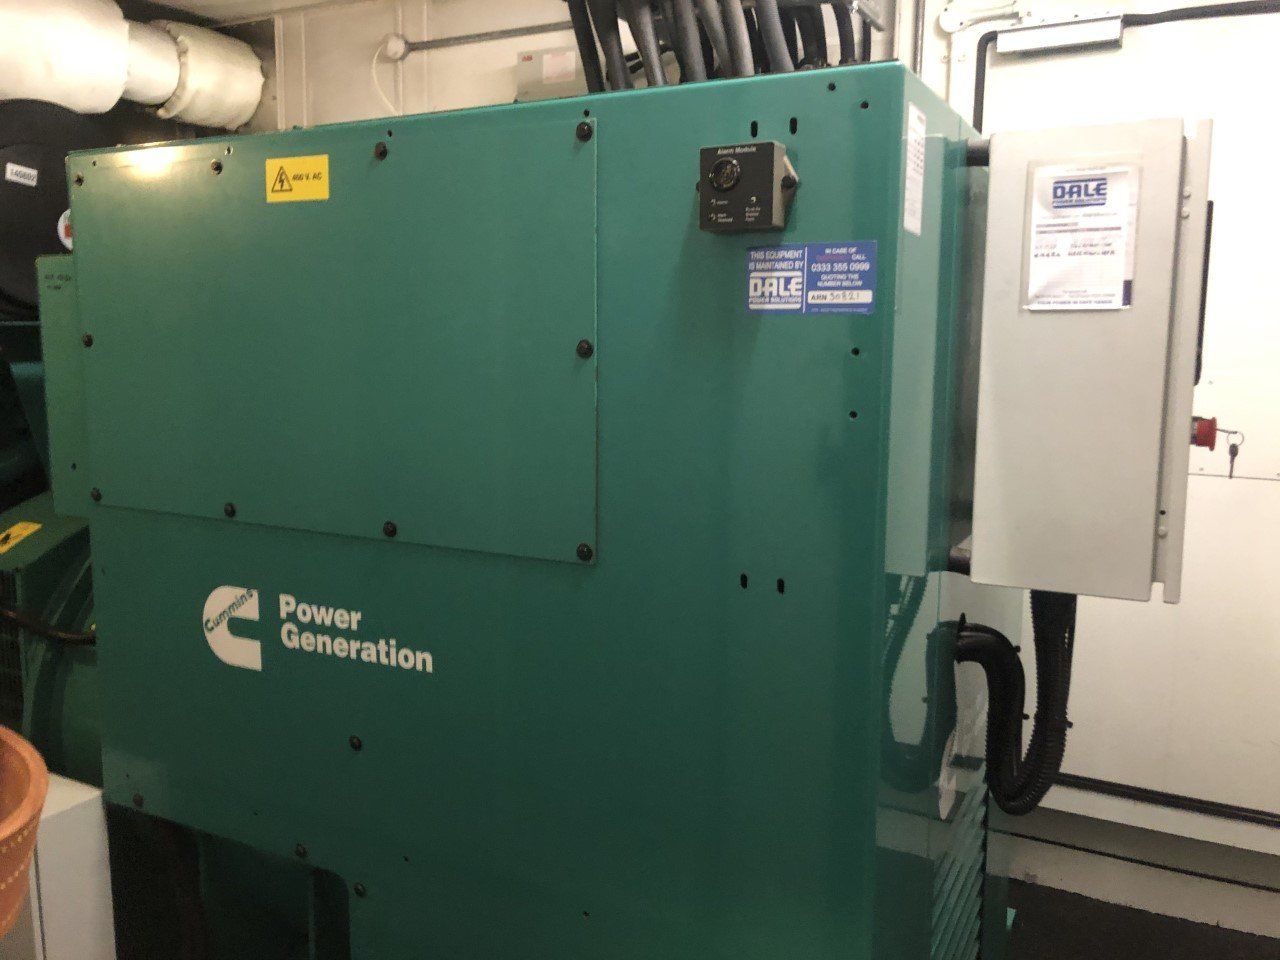 We buy used generators from data centres and banks